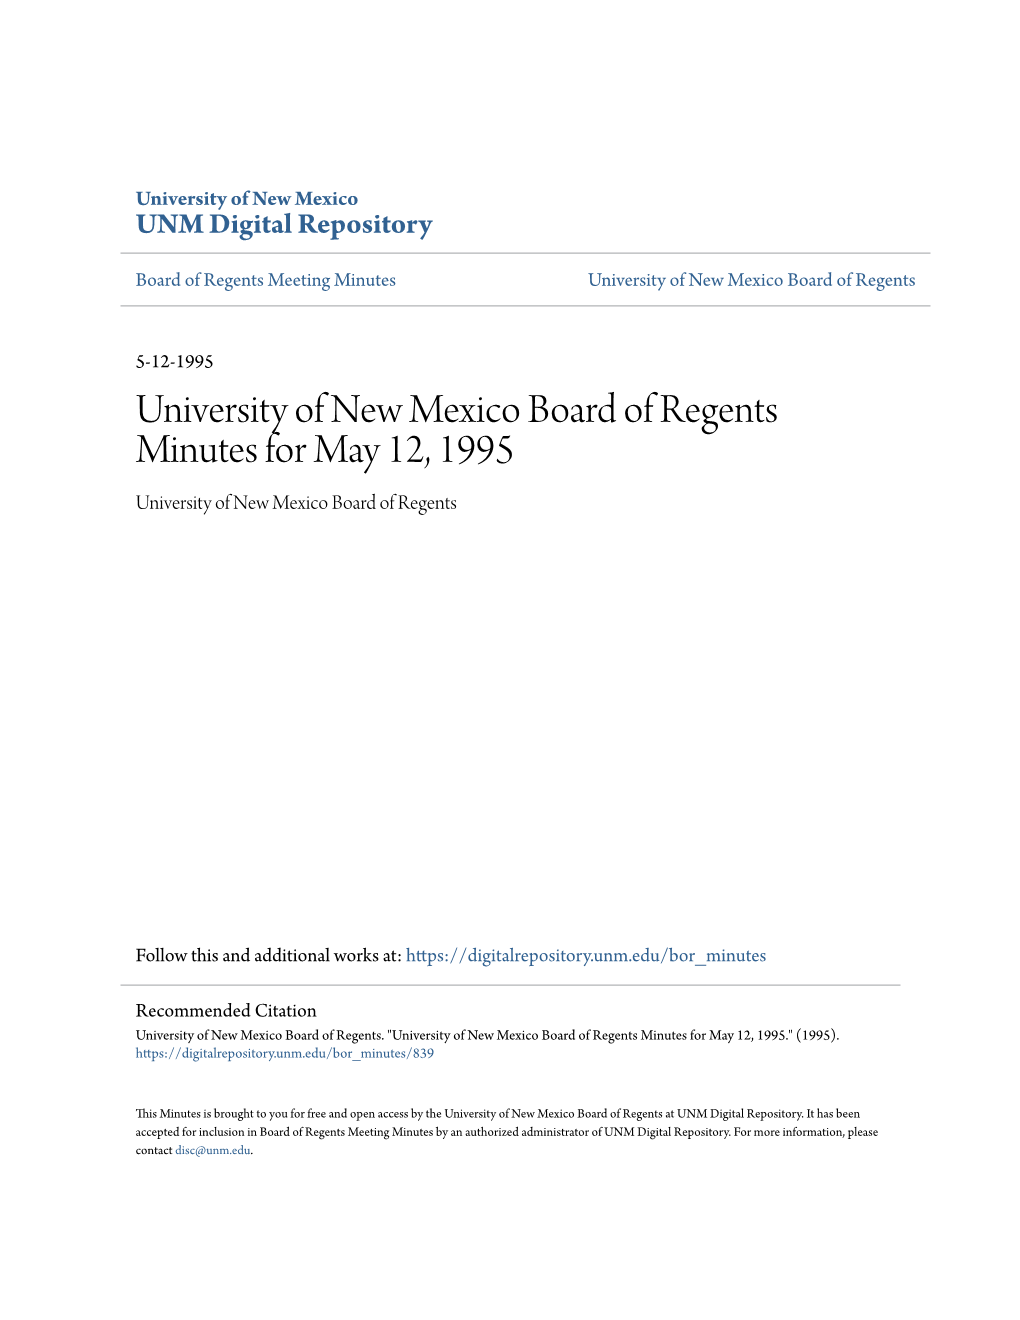 University of New Mexico Board of Regents Minutes for May 12, 1995 University of New Mexico Board of Regents